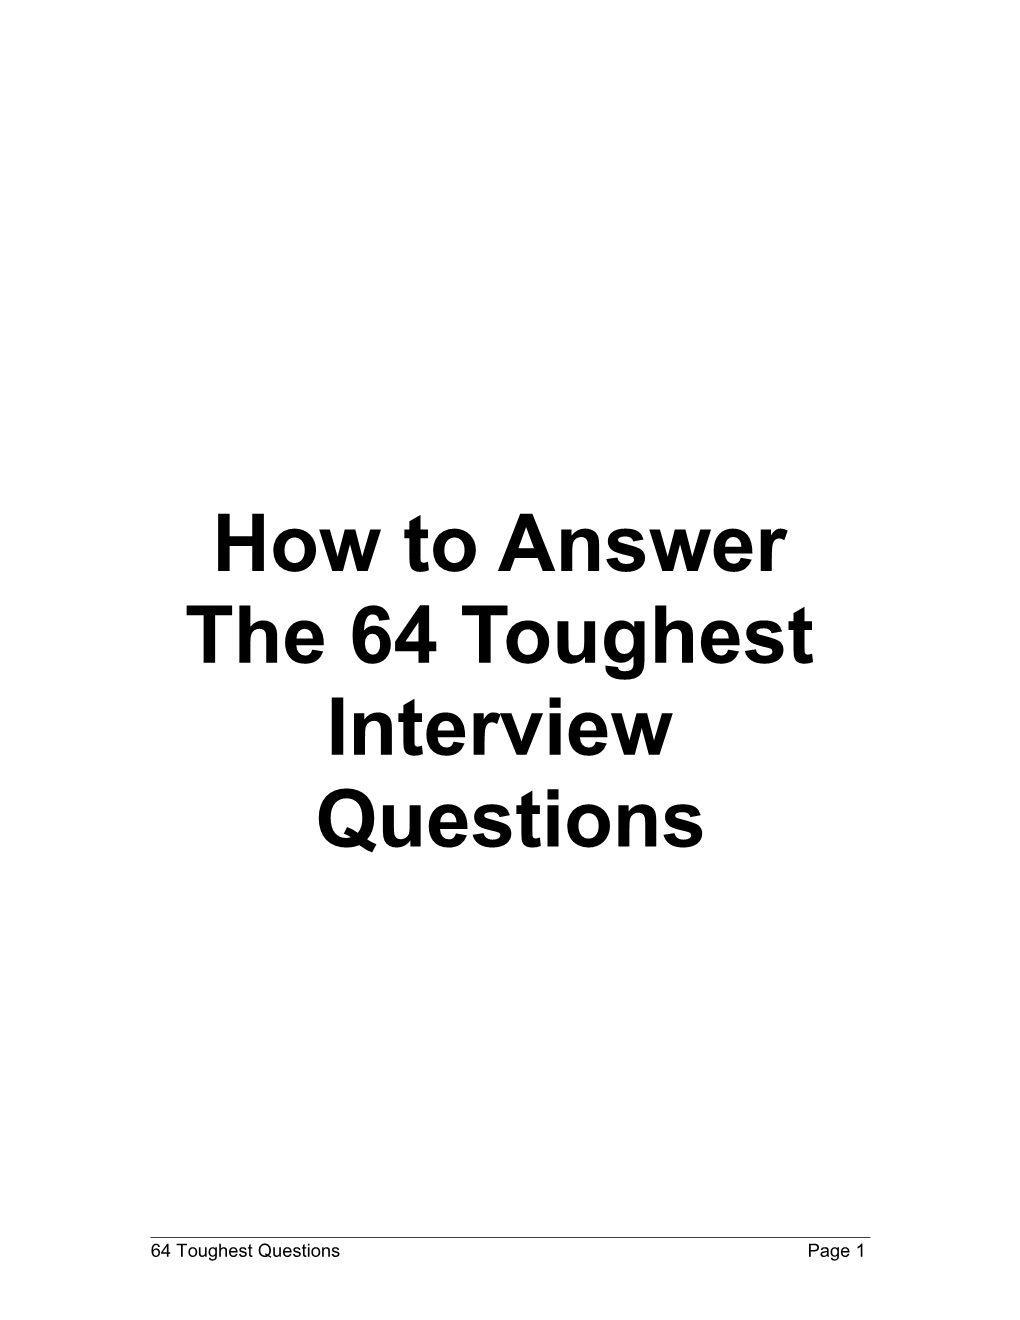 How to Answer the 64 Toughest Interview Questions